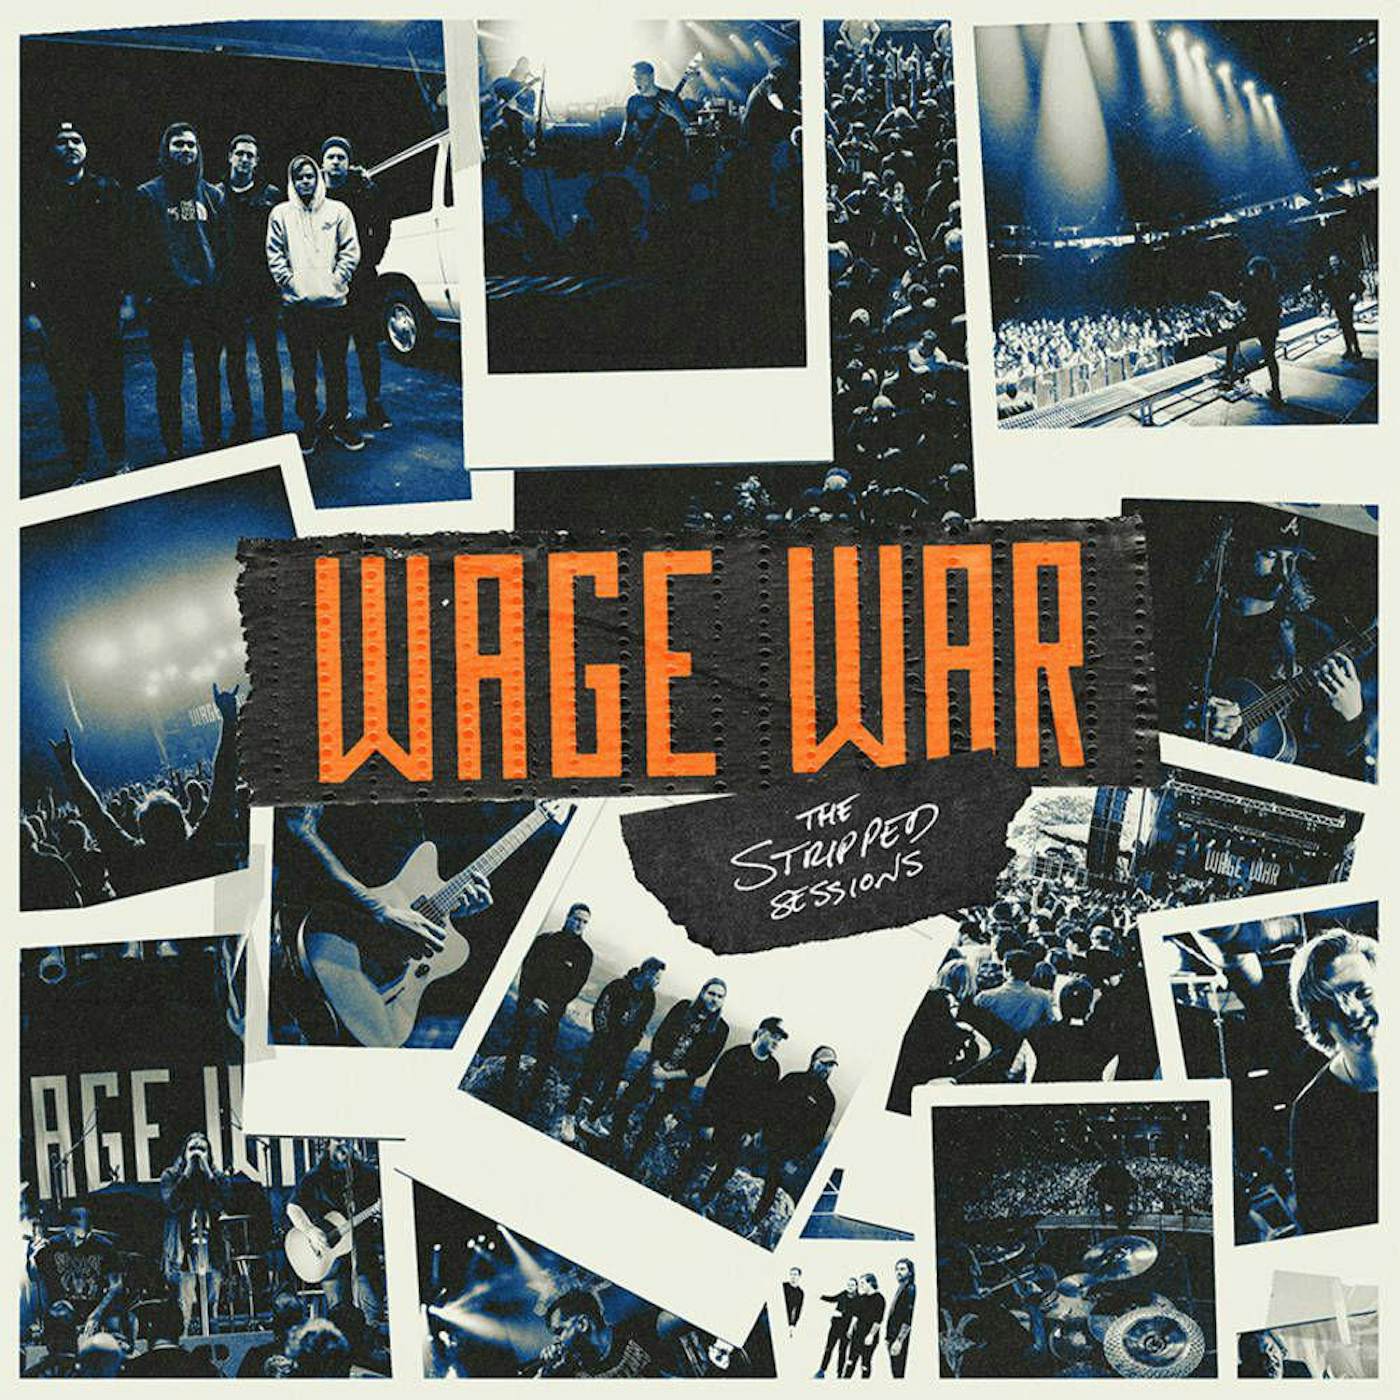 Wage War Stripped Sessions Vinyl Record